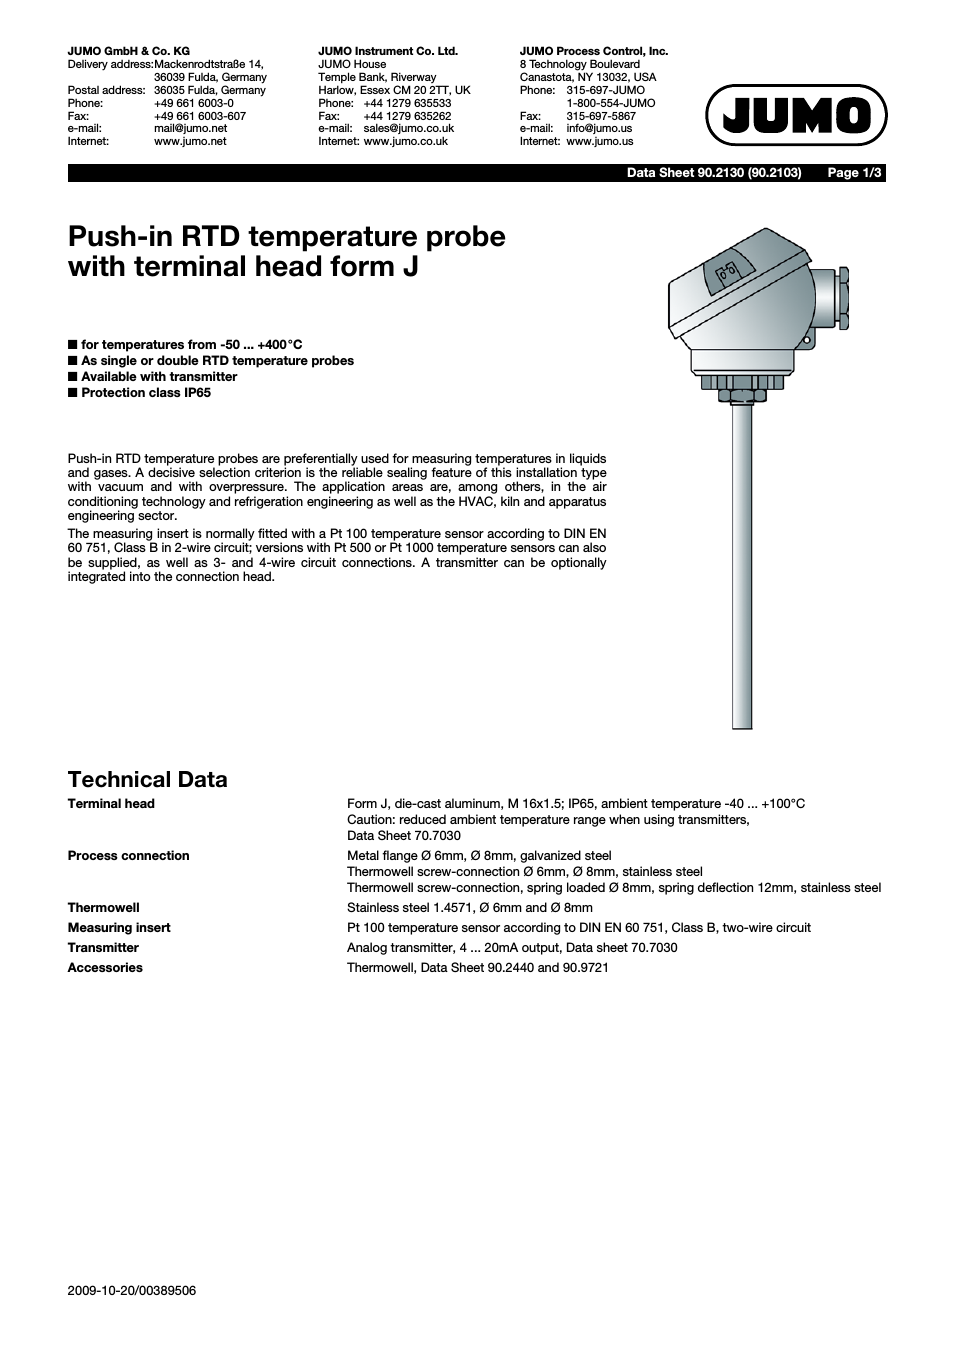 902130 Push-In RTD Temperature Probe with Form J Terminal Head Data Sheet